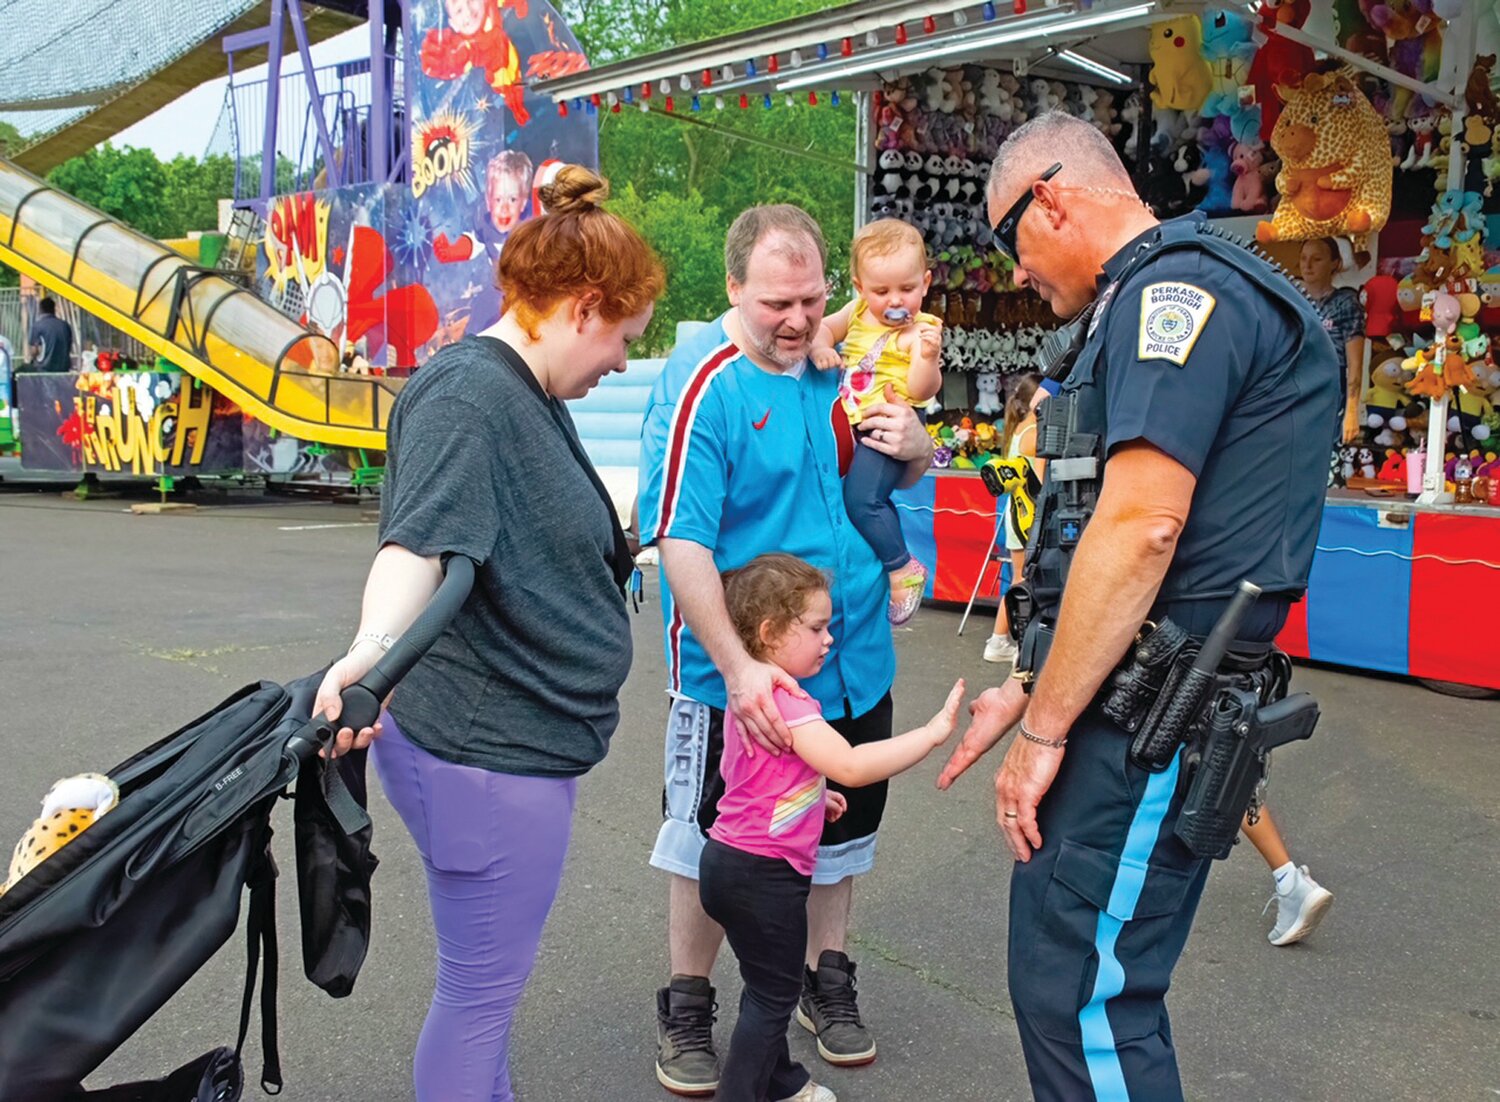 Nora Romano gives a high five to Perkasie Borough Police Officer Tom Brun as her family members, Nick, Sheila and Harper, look on.